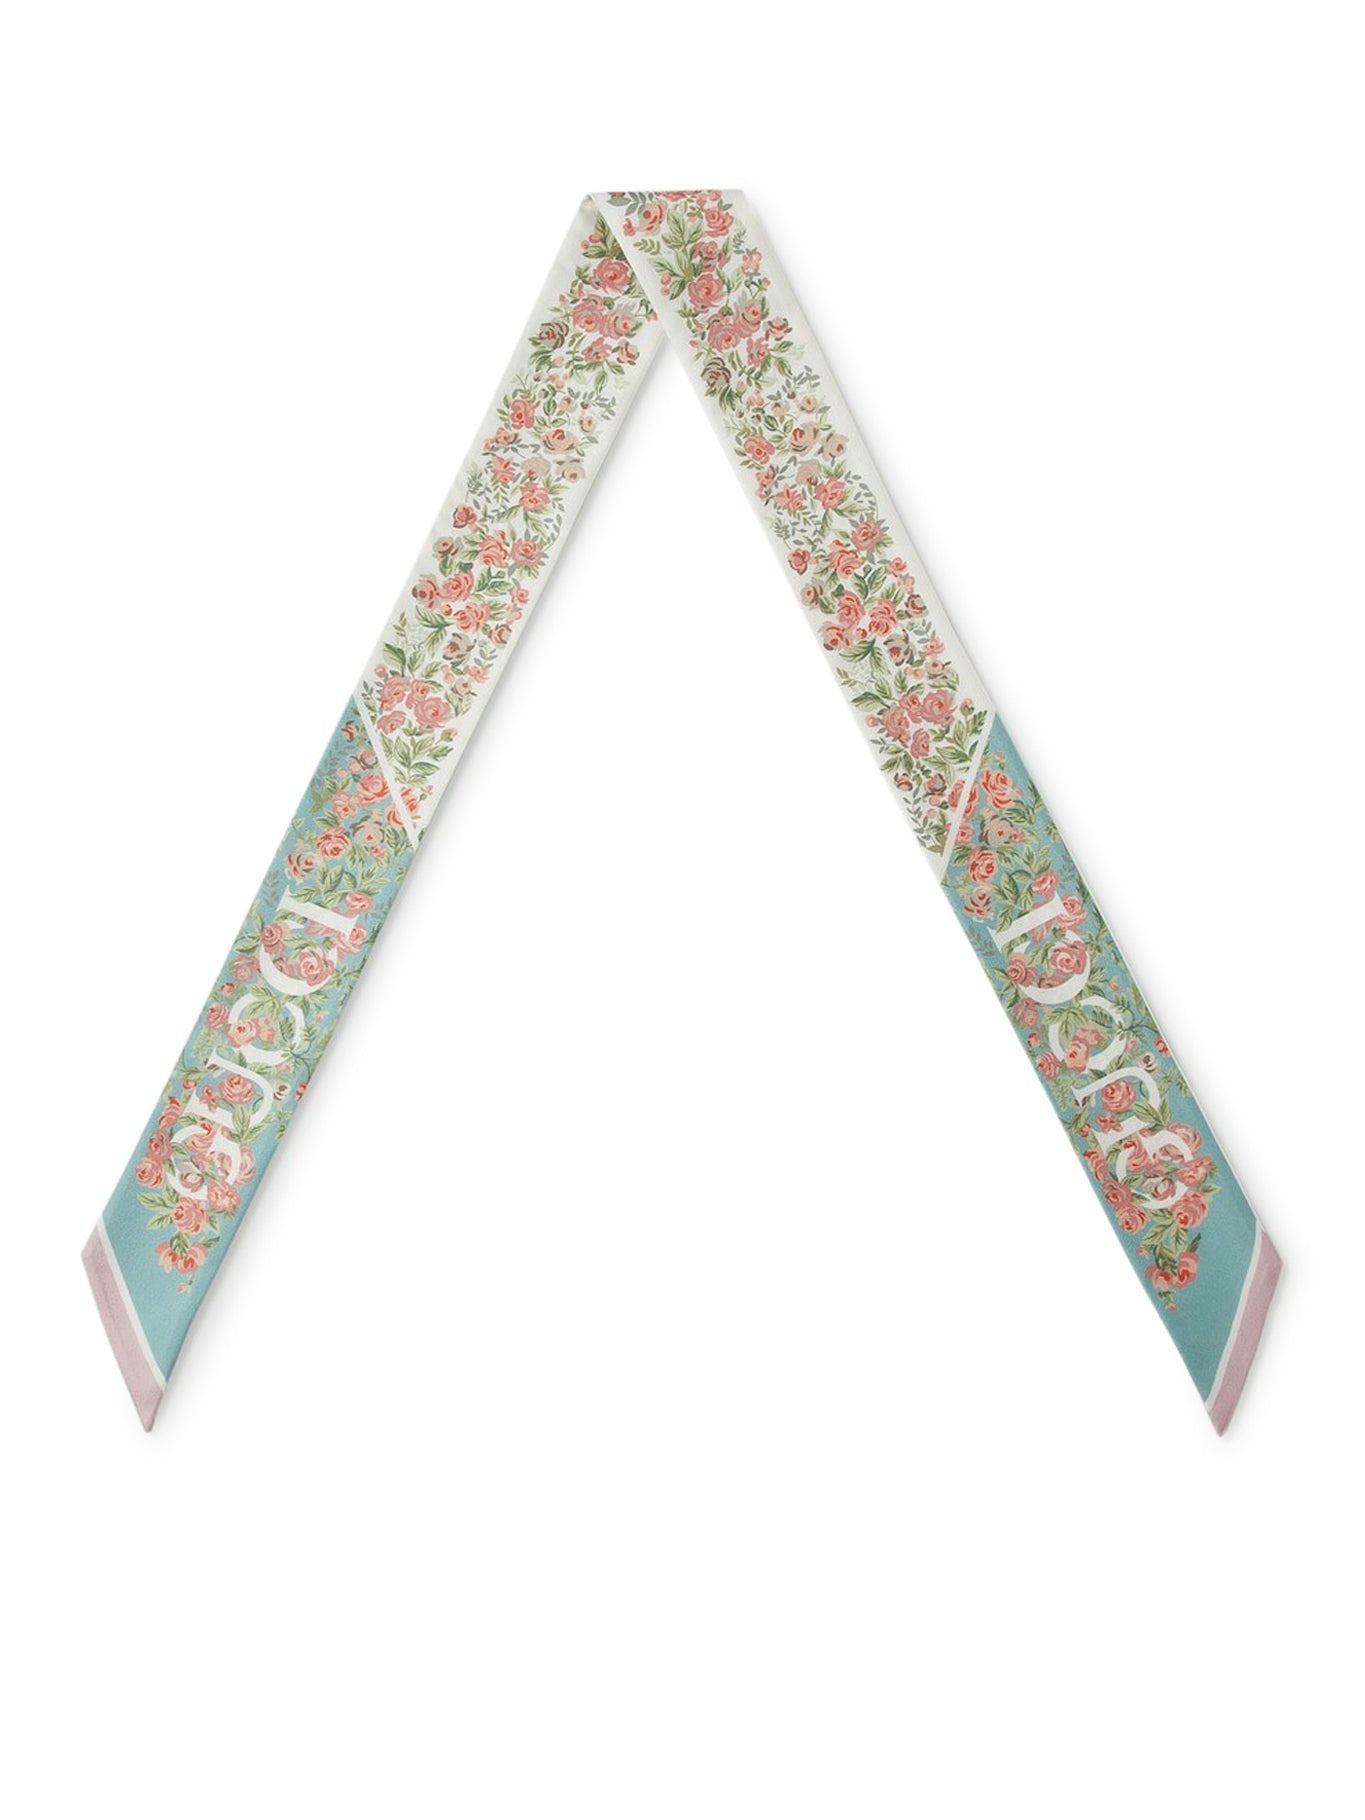 SILK BOW WITH FLORAL GUCCI PRINT